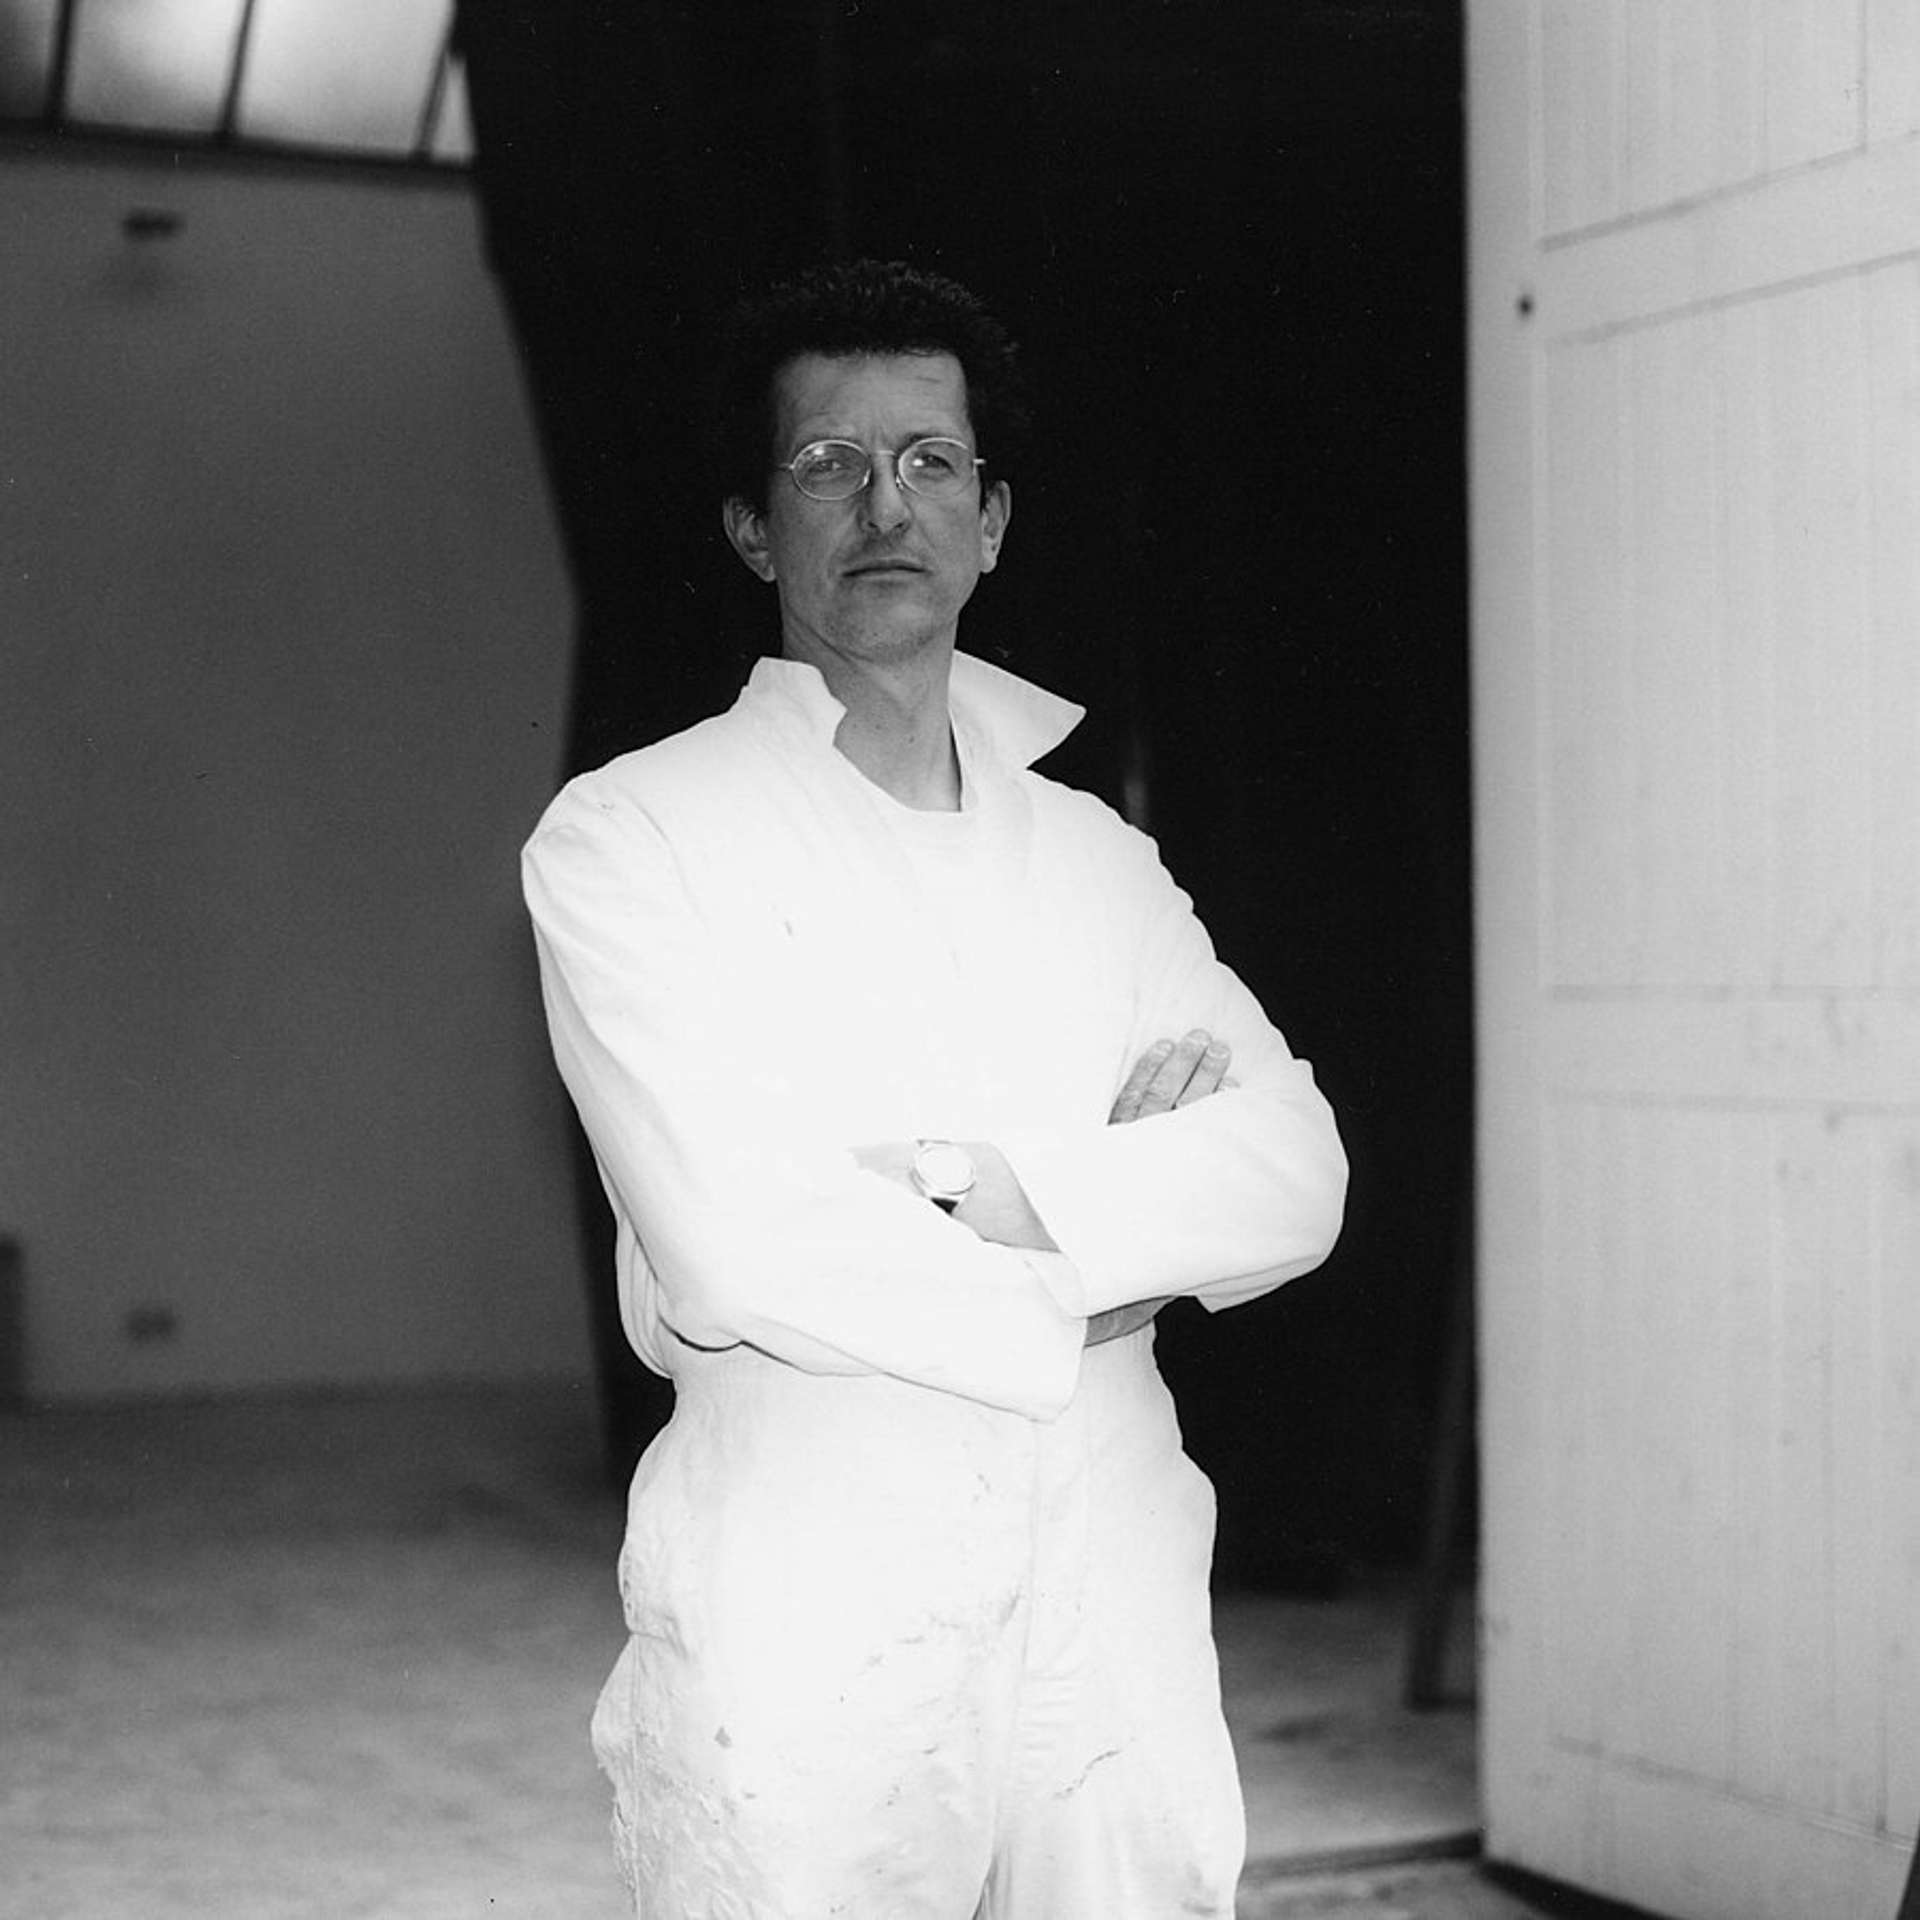 A black and white photographic portrait of artist Antony Gormley, from the waist up.